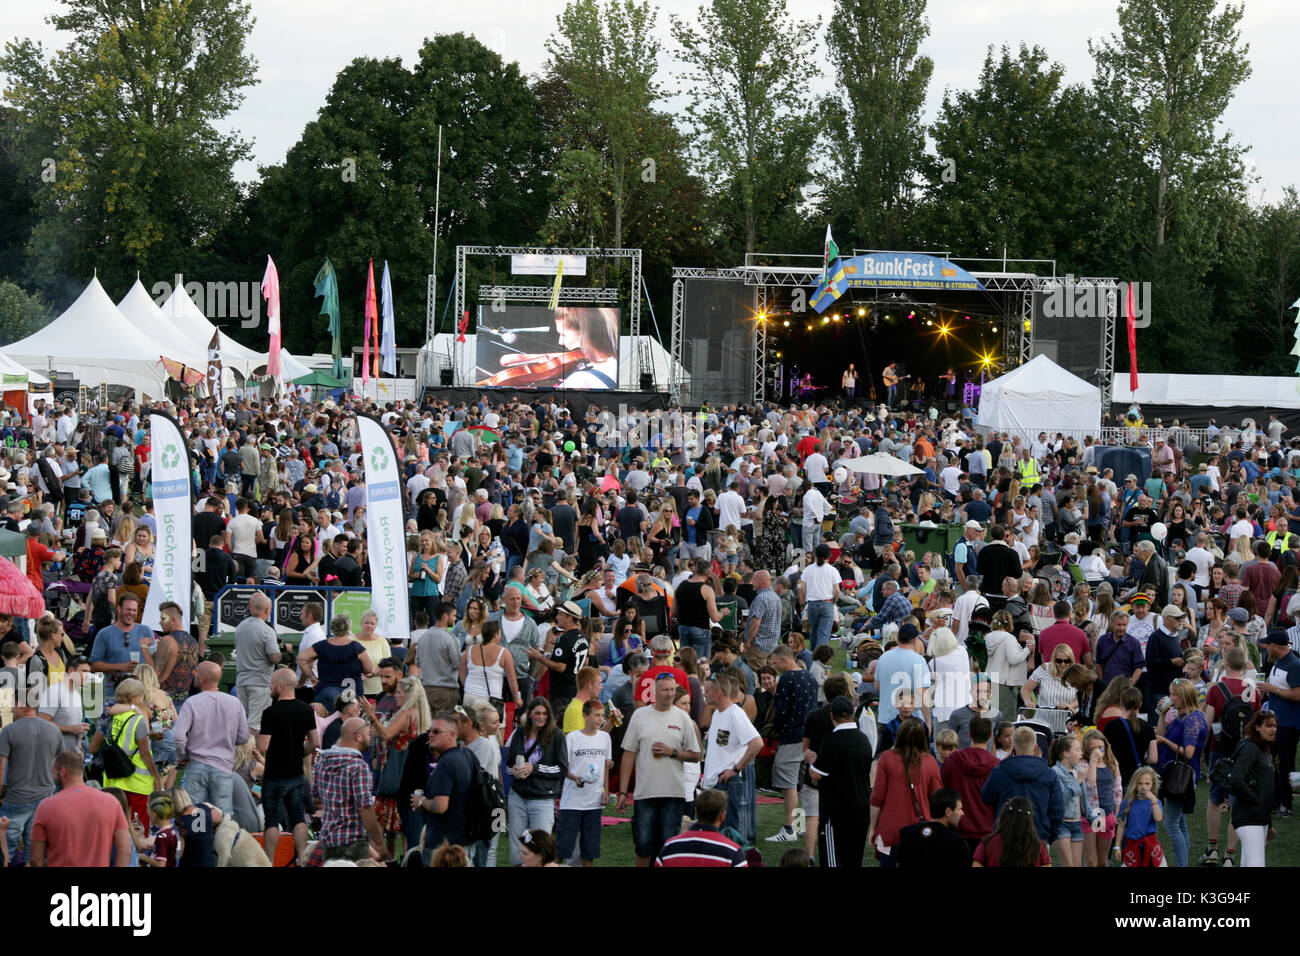 Wallingford, Oxfordshire, UK. 2nd September, 2017.  bunkfest one of europes biggest festives run by volunteers sees record crowds  stuart emmerson/alamy Credit: stuart emmerson/Alamy Live News Stock Photo